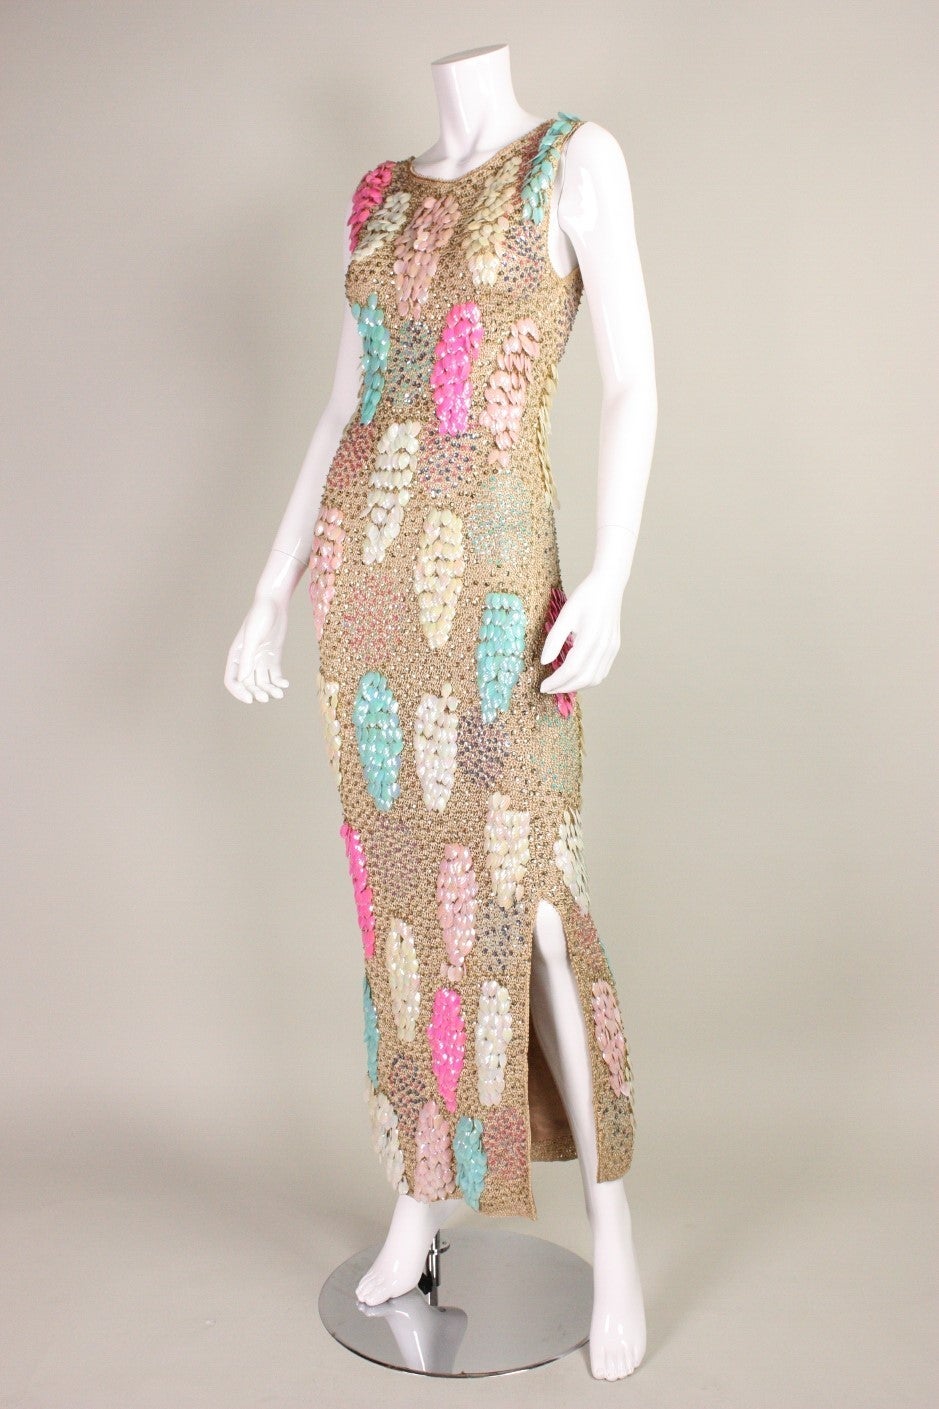 1960's Crocheted & Sequined Gown.

Fits sizes 2-4 US.